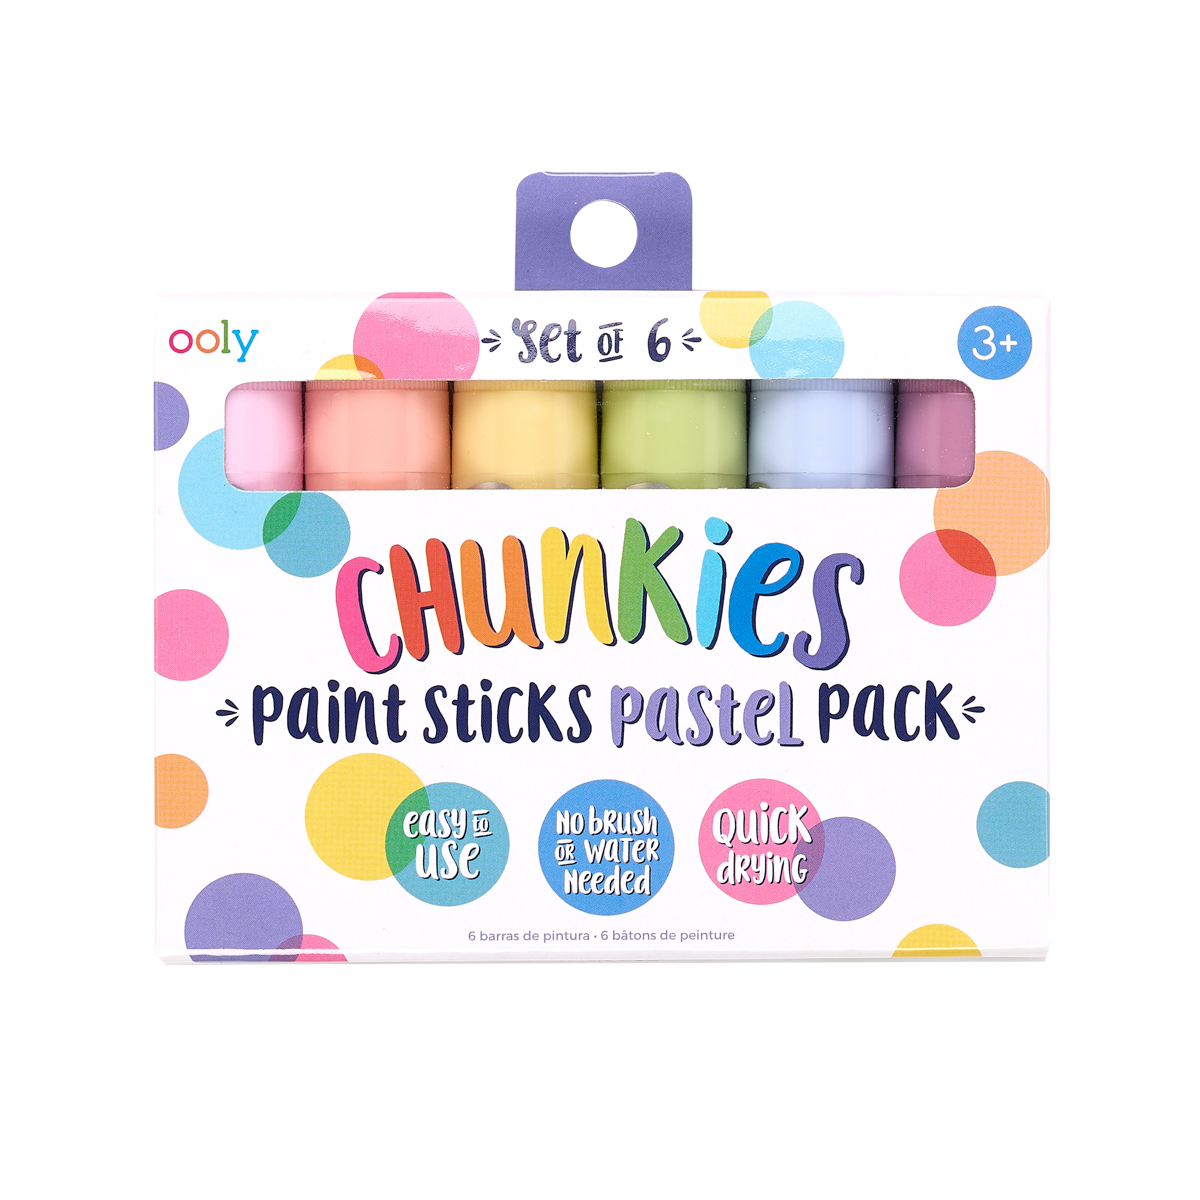 3 Packages of Ooly Chunkies Paint Sticks - Set of 12, ONLINE RETURNS  OFFICE CHAIRS & MORE!! #27!! PICK UP MONDAY MAY 22ND FROM 7 AM - 6 PM  ONLY!!